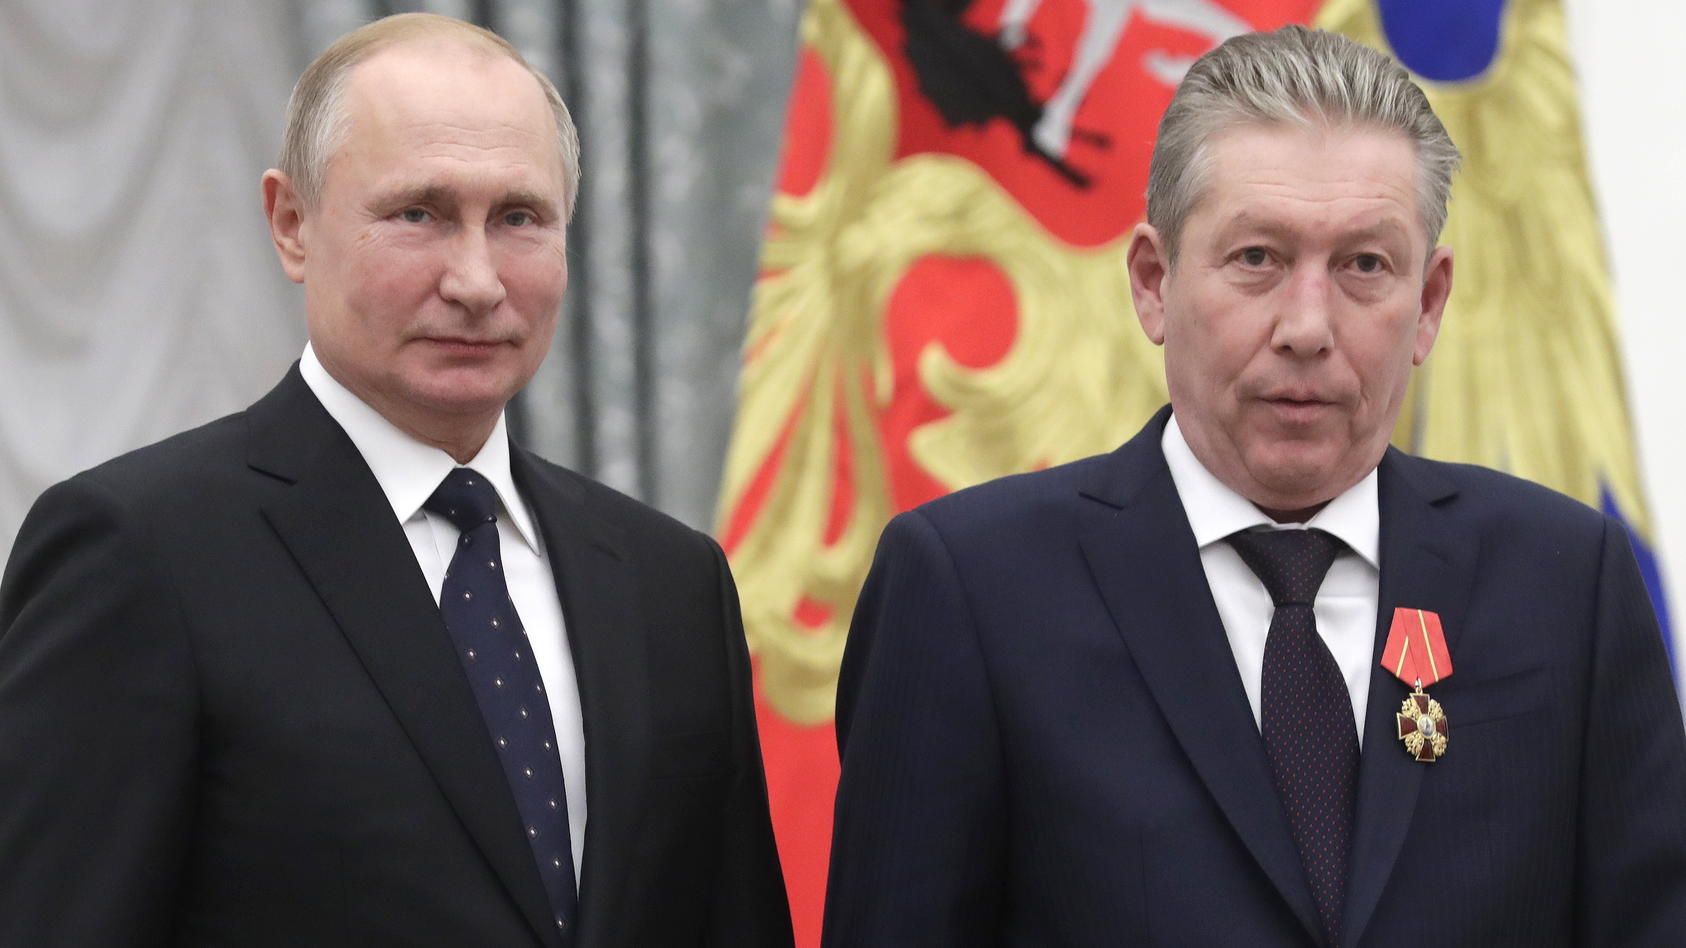 : Russia's President Vladimir Putin (L) awards an Order of Alexander Nevsky to Lukoil First Executive Vice-President Ravil Maganov at a ceremony to present state decorations at the Moscow Kremlin. Mikhail Metzel/TASS